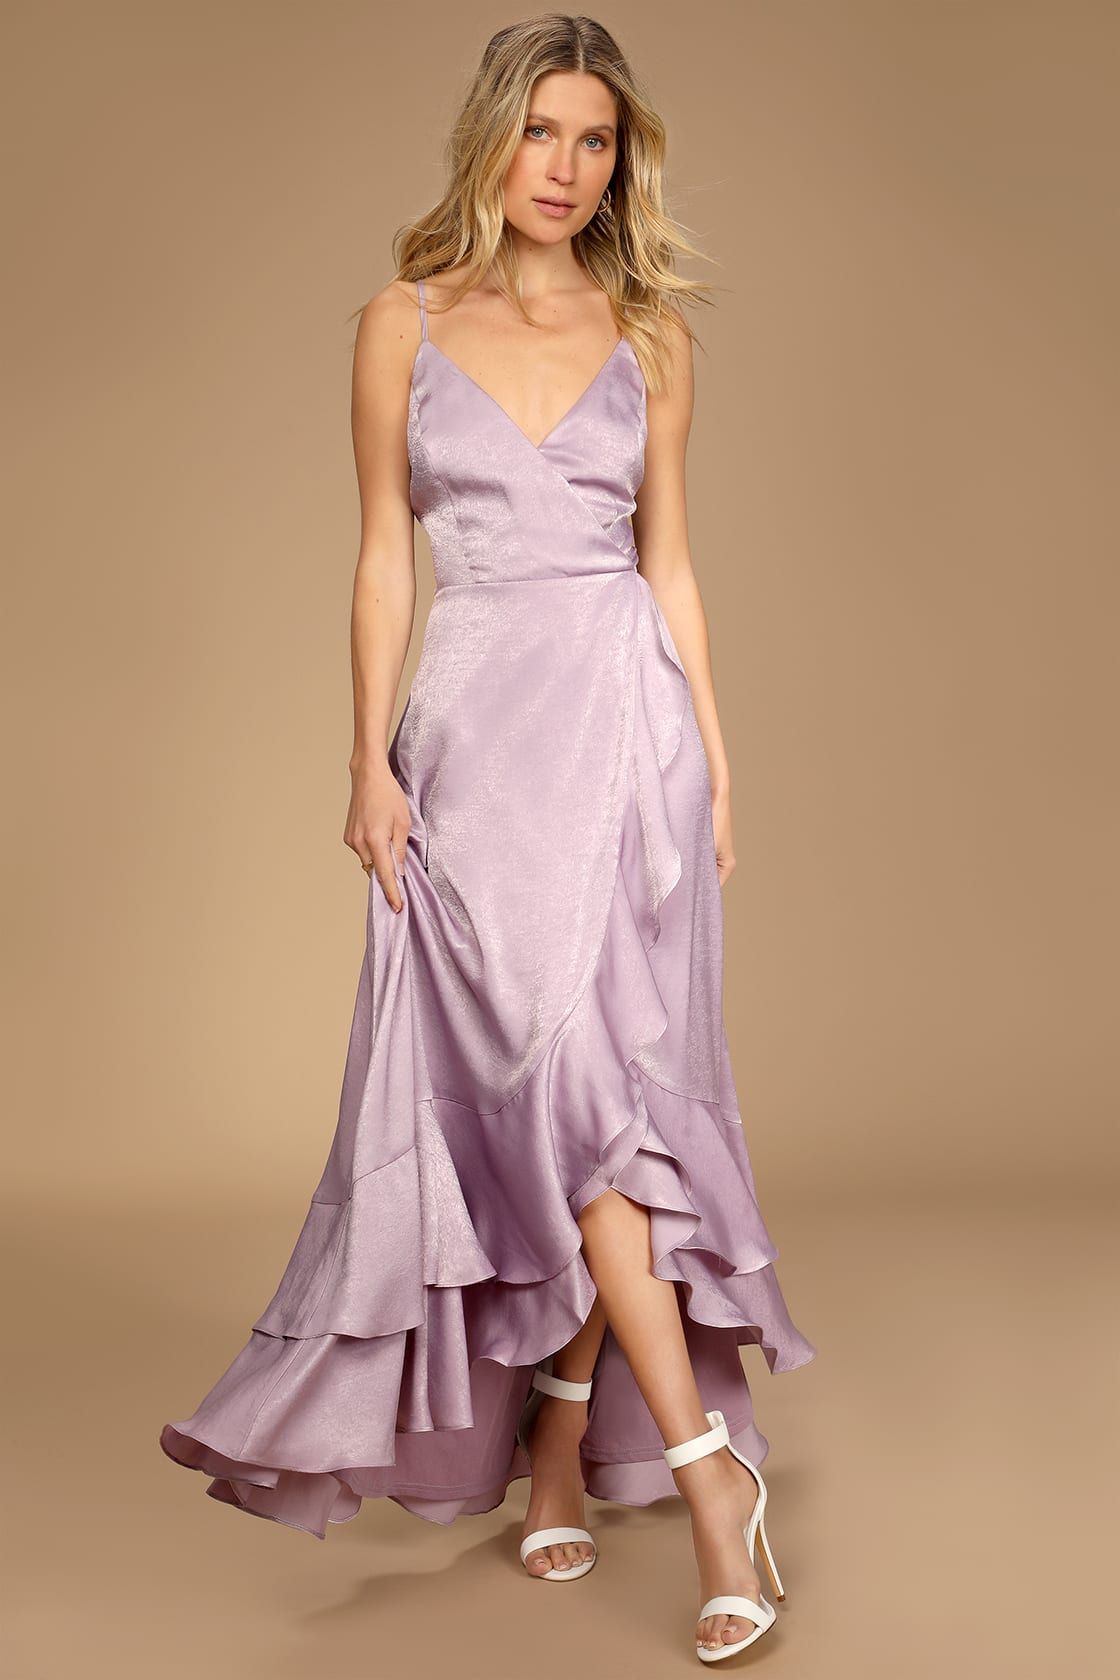 In Love Forever Lavender Satin Lace-Up High-Low Maxi Dress | Lulus